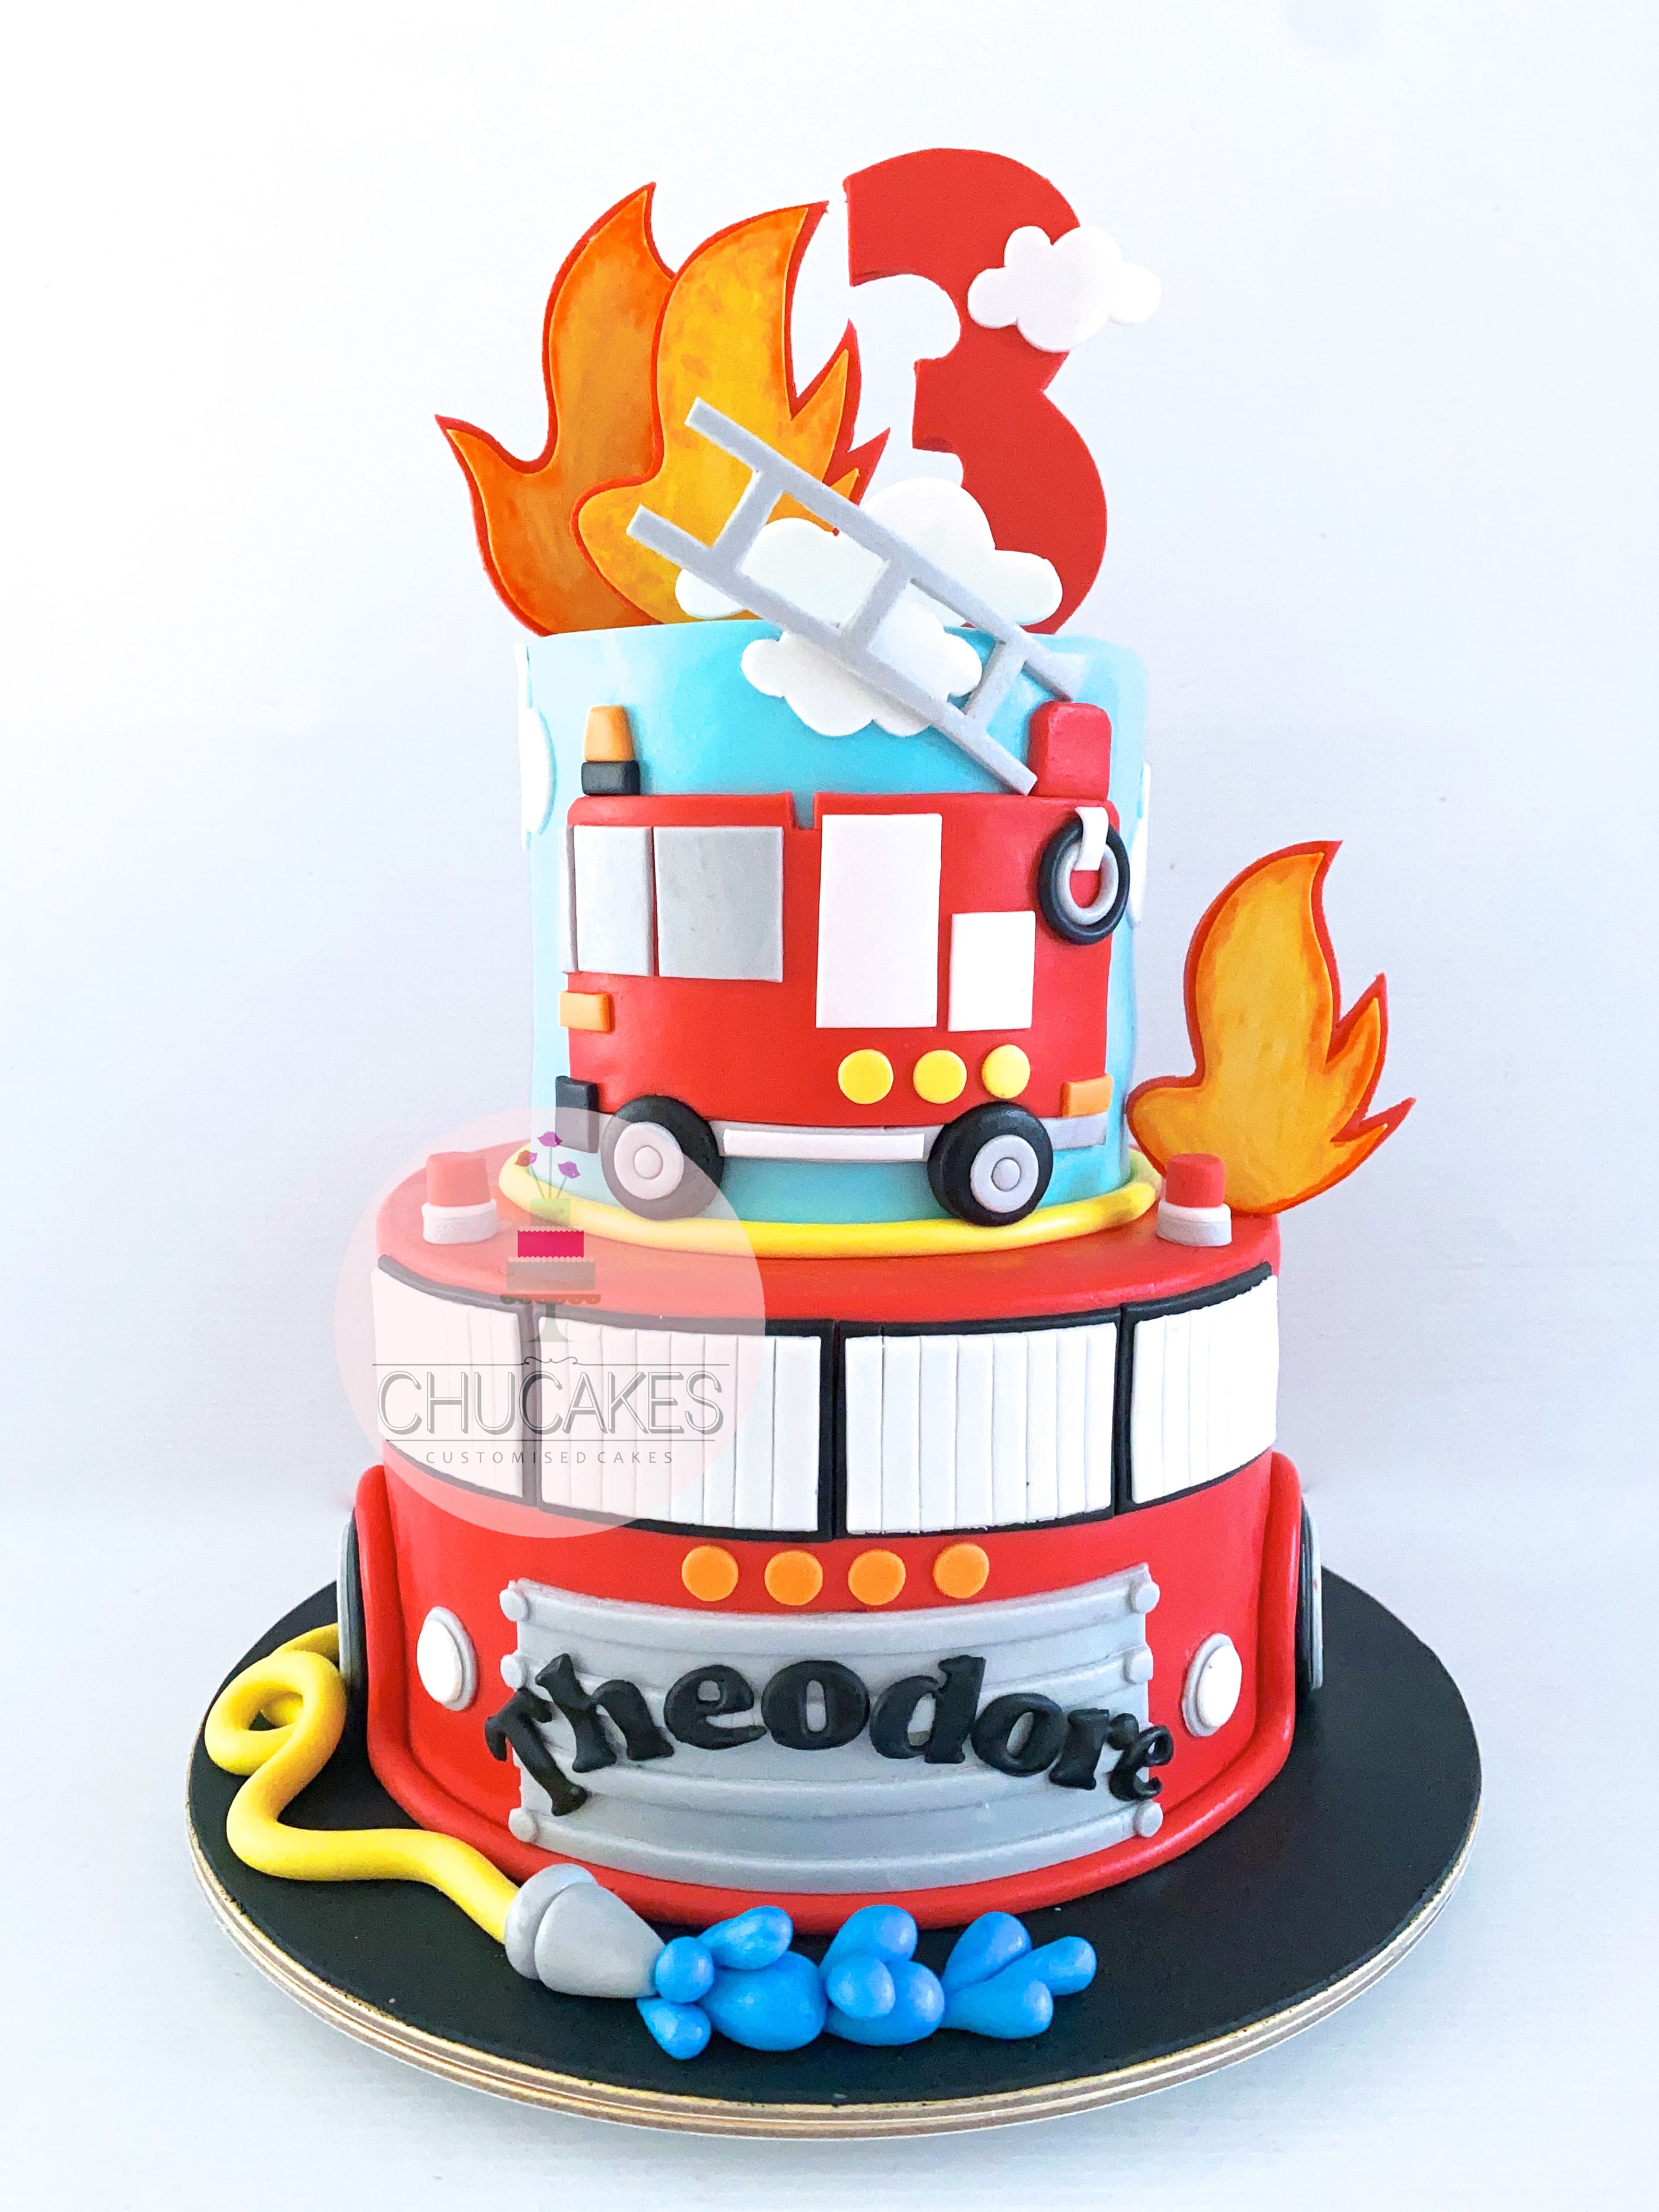 Fire Truck Cake | All decorations are made of fondant. | Kelly Lloyd |  Flickr